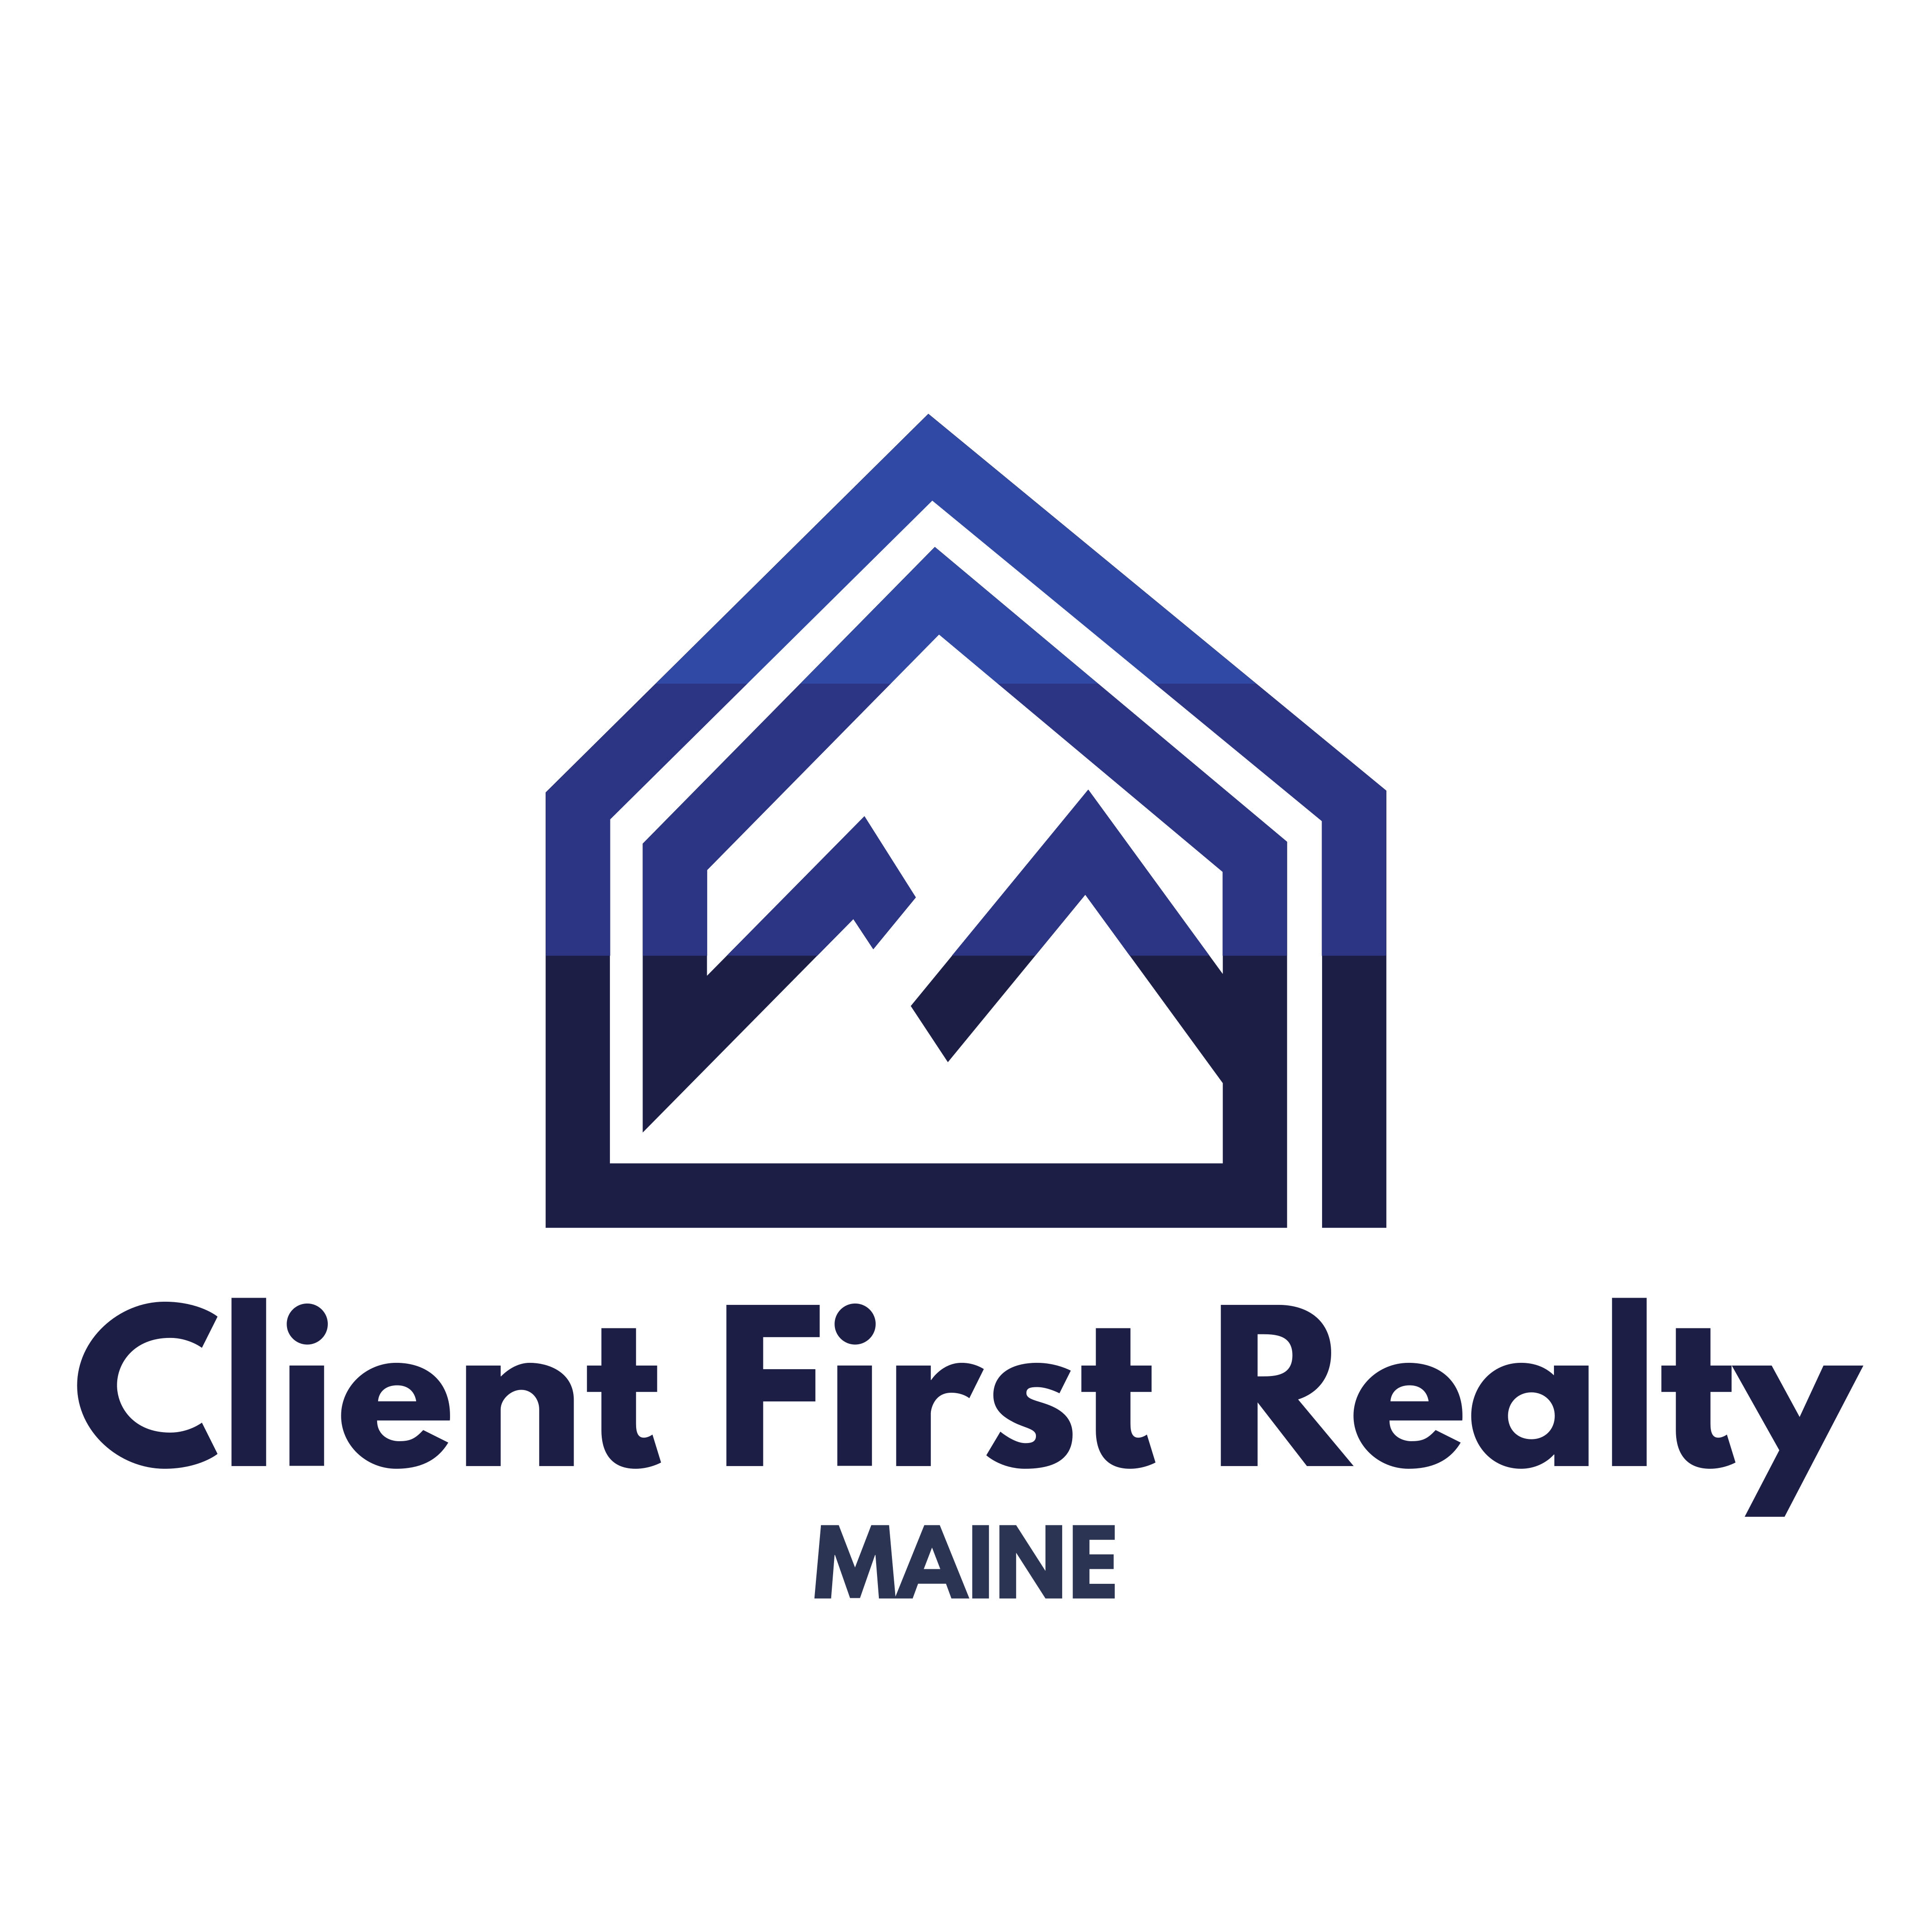 Client First Realty Maine